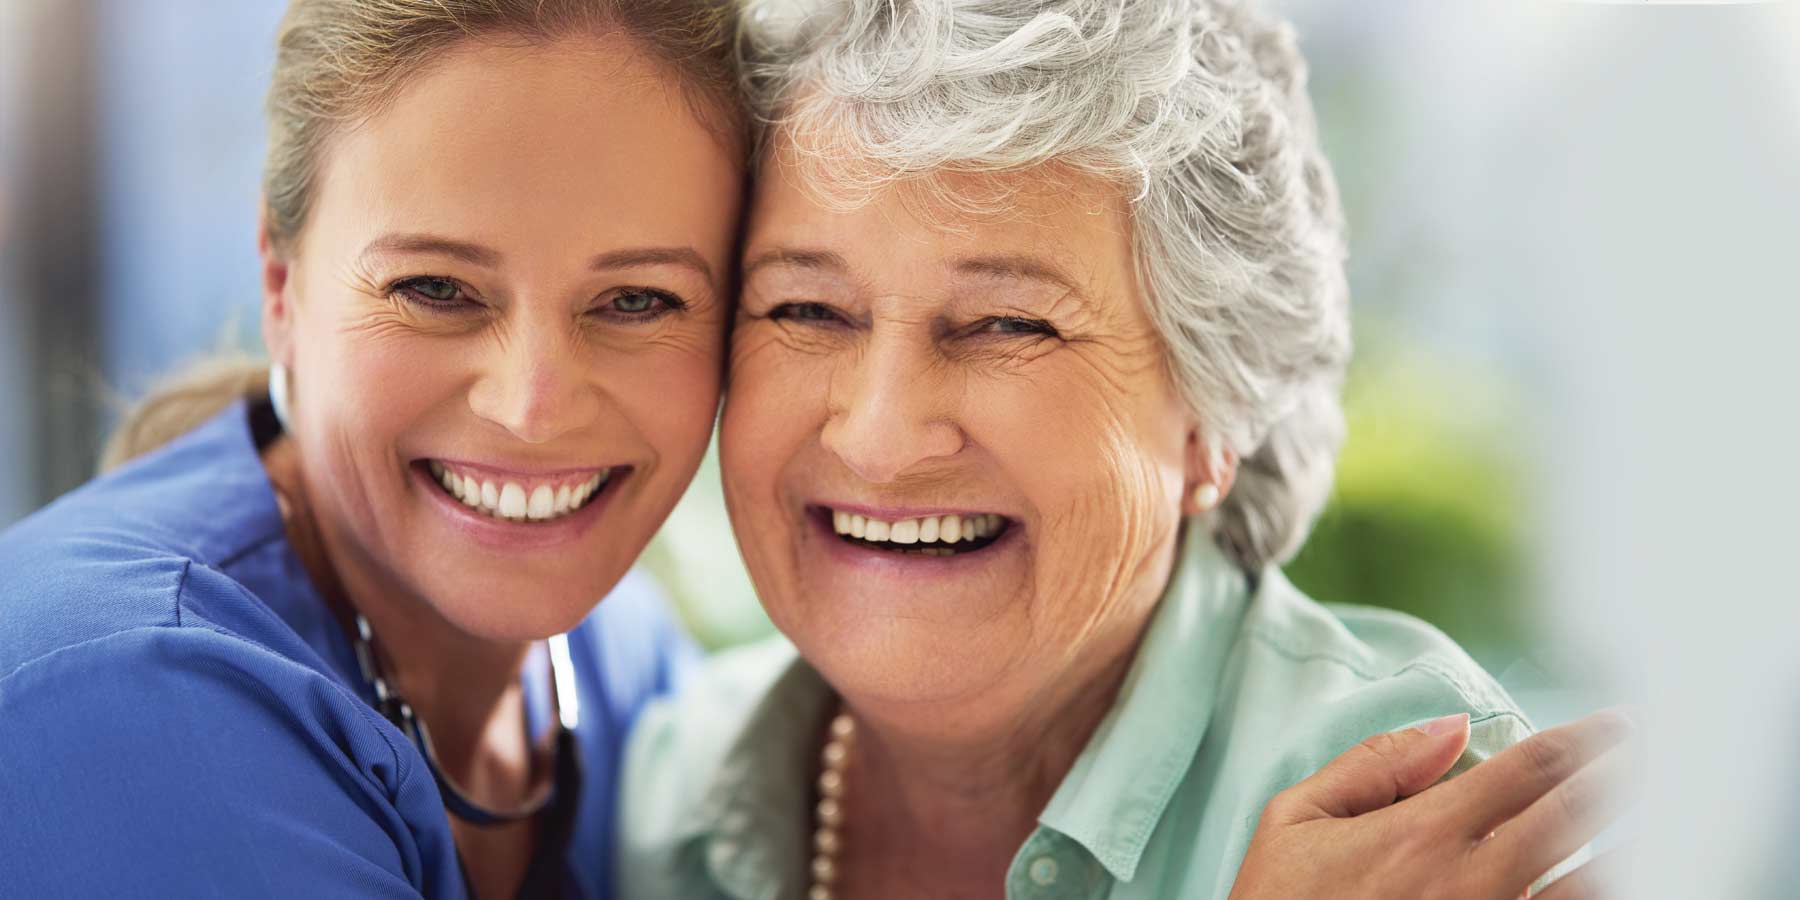 in home care services for seniors